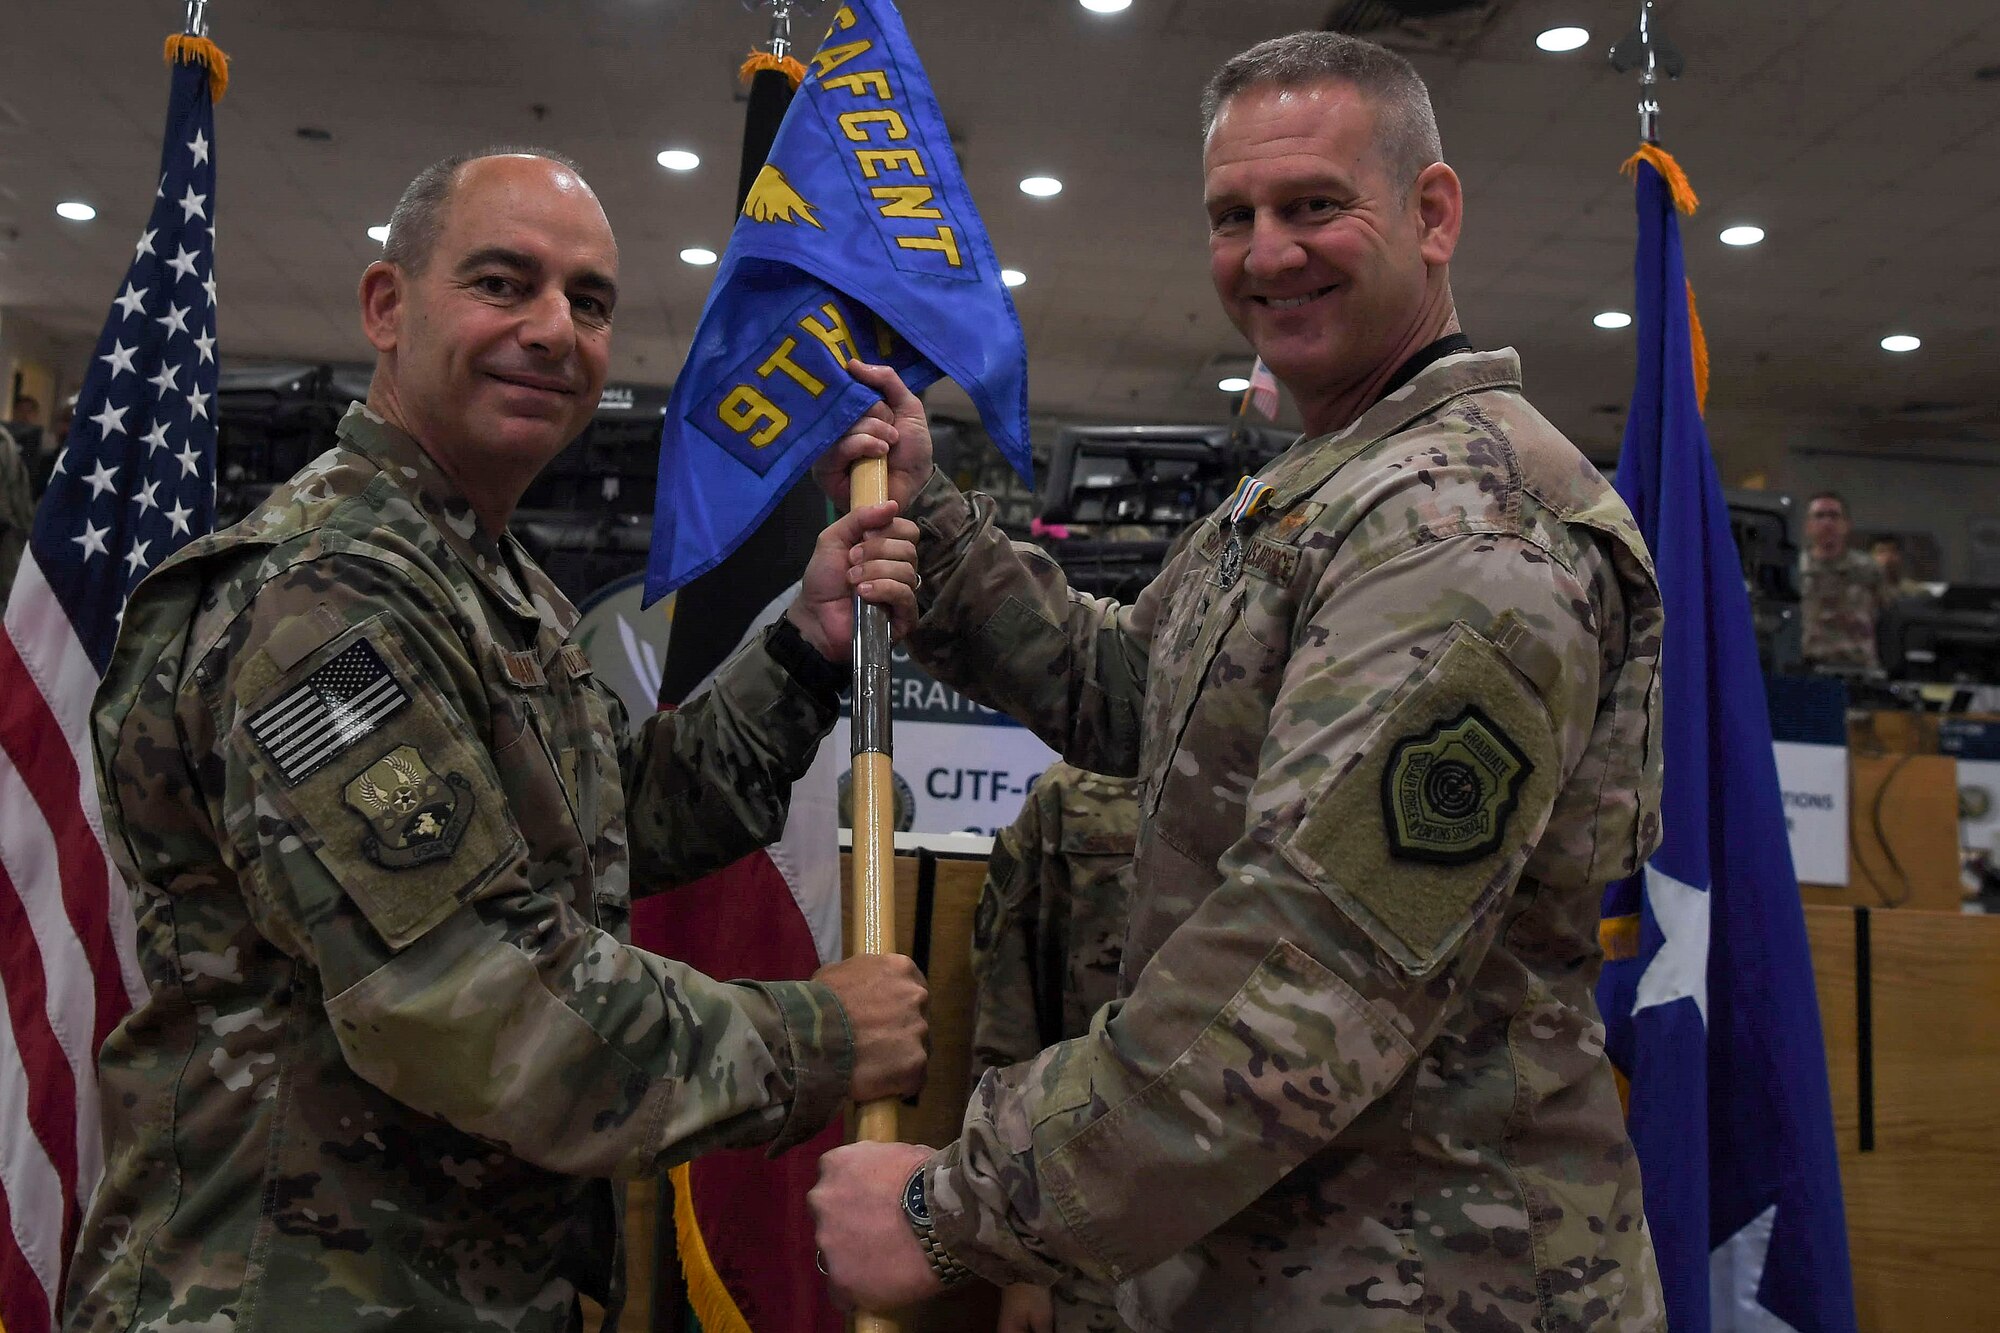 Maj. Gen. Dirk Smith (right), 9th Air Expeditionary Task Force - Levant outgoing commander, passes the 9th AETF-L guidon to Lt. Gen. Jeffrey Harrigian, United States Air Force Central Command commander, during a change of command ceremony May 5, 2018, at an undisclosed location in Southwest Asia.